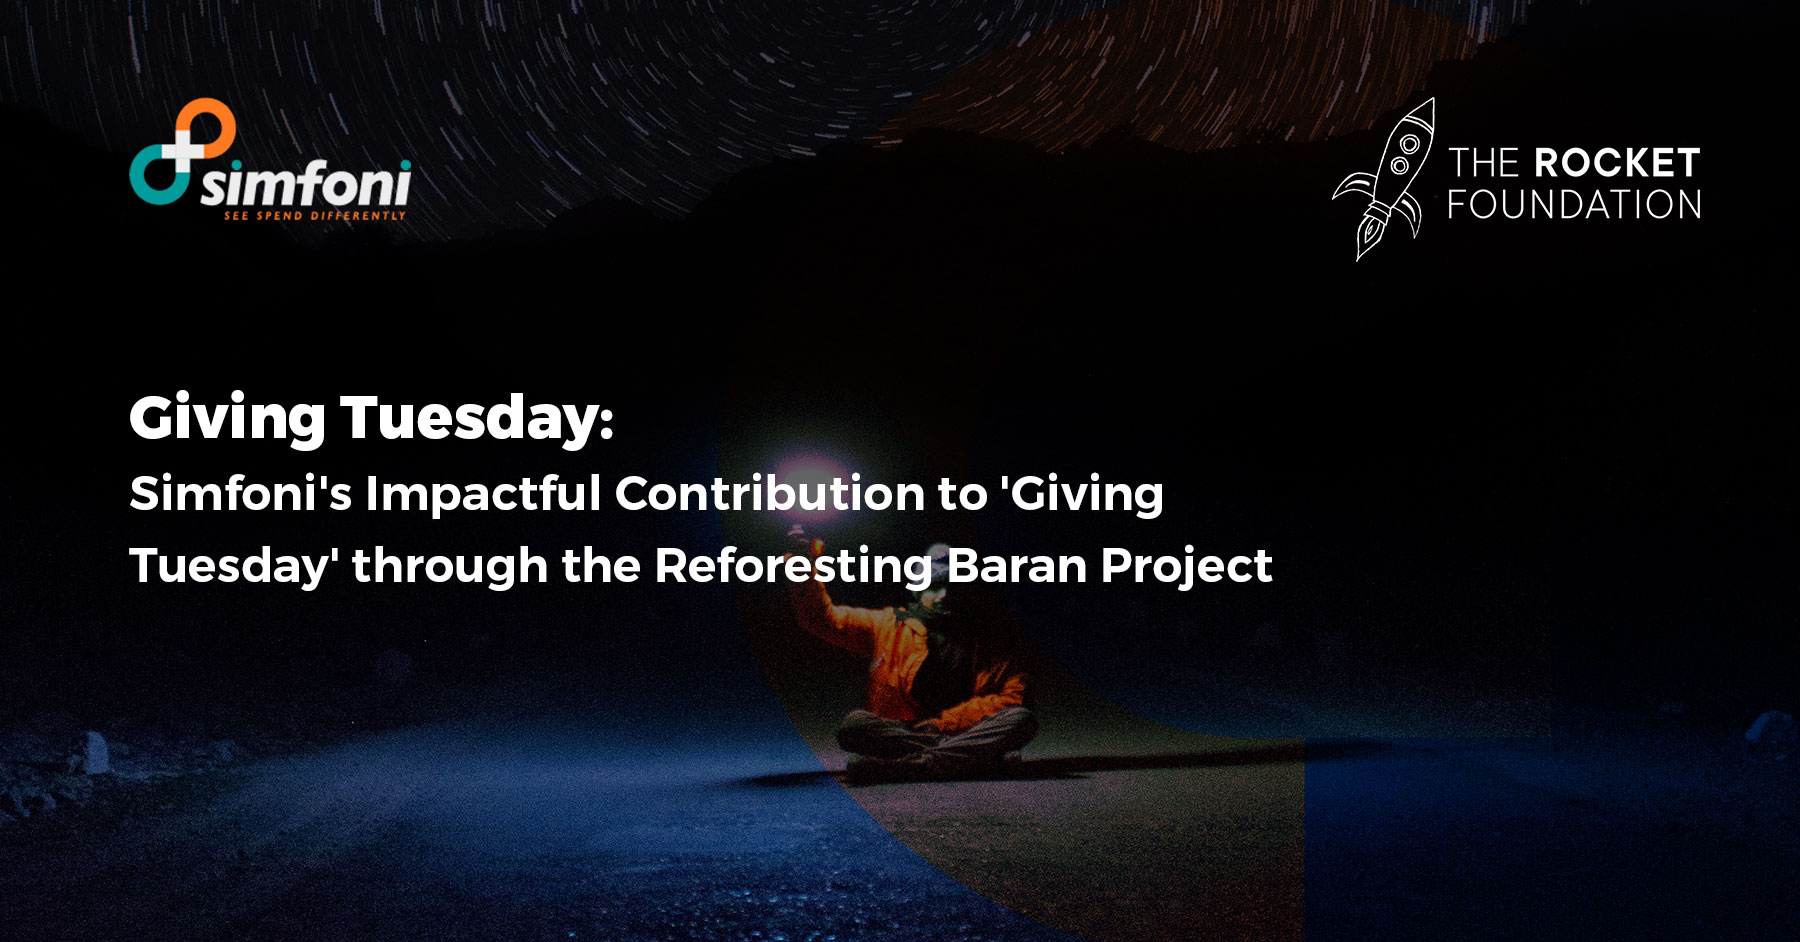 Simfoni’s Impactful Contribution to ‘Giving Tuesday’ through the Reforesting Baran Project